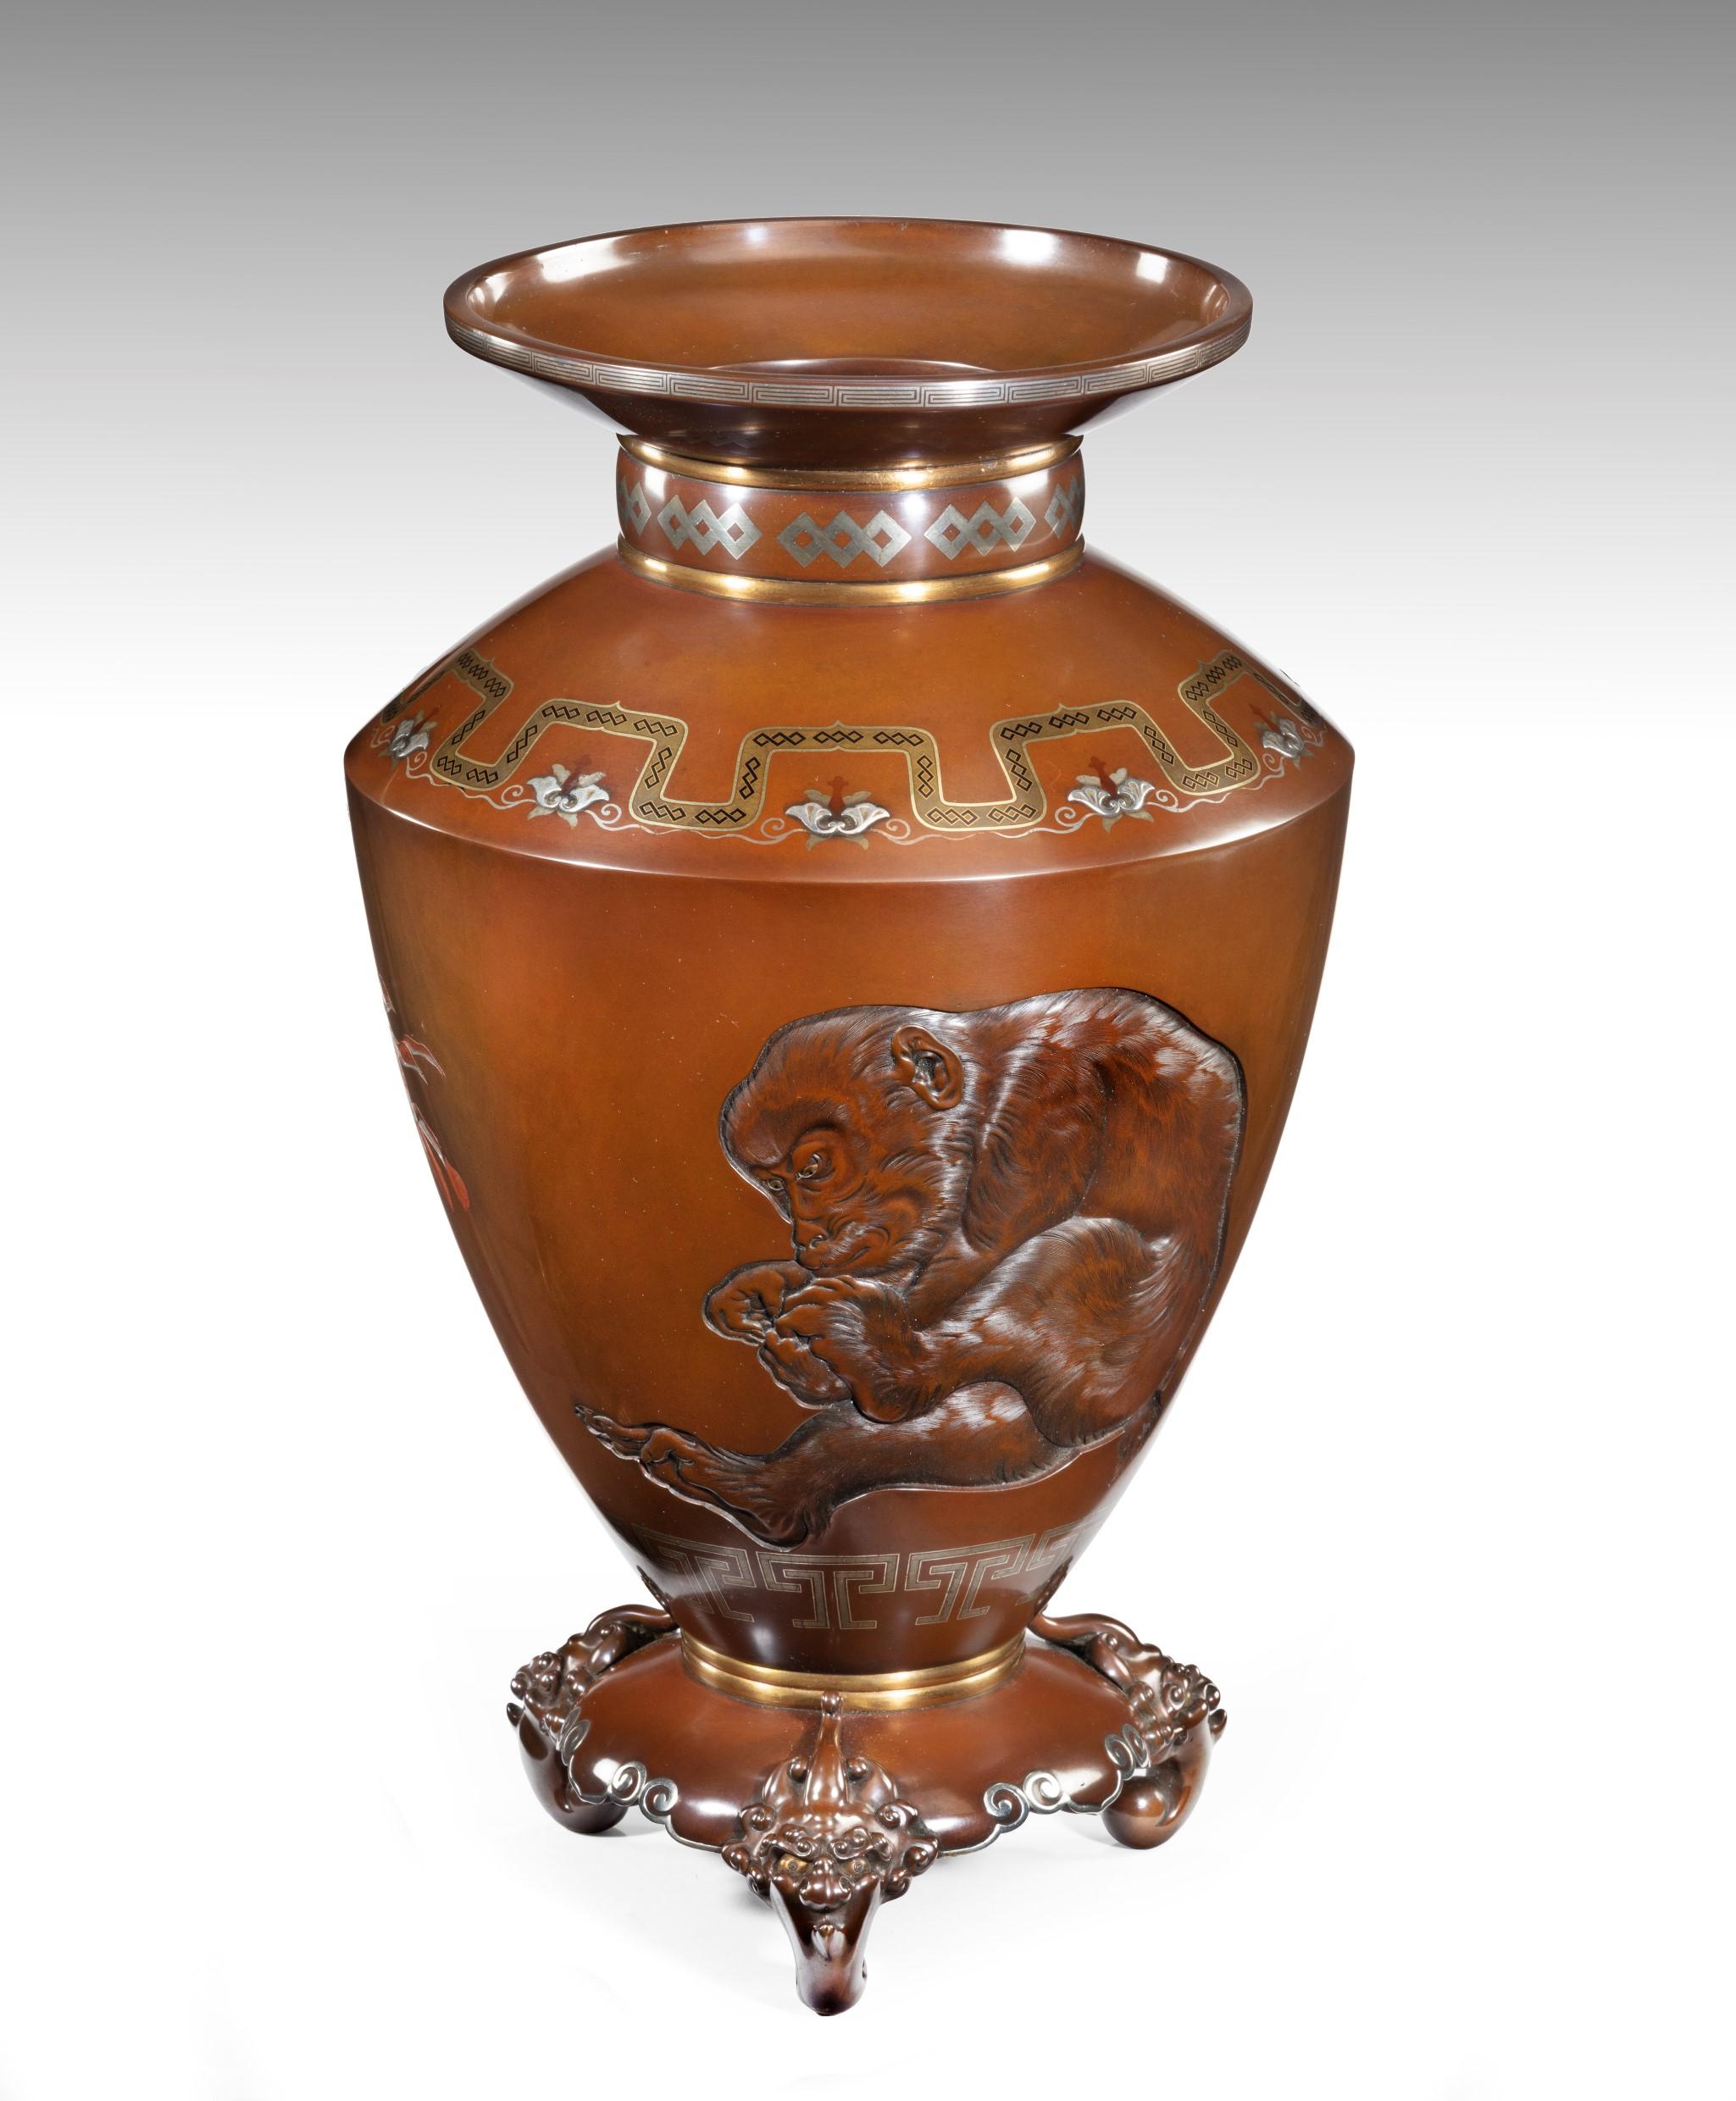 As part of our Japanese works of art collection we are delighted to offer this early Meiji period 1868-1912 Kaga school bronze artist signed vase, this magnificent quality piece of metalwork reigns from the very early years of the Meiji period circa